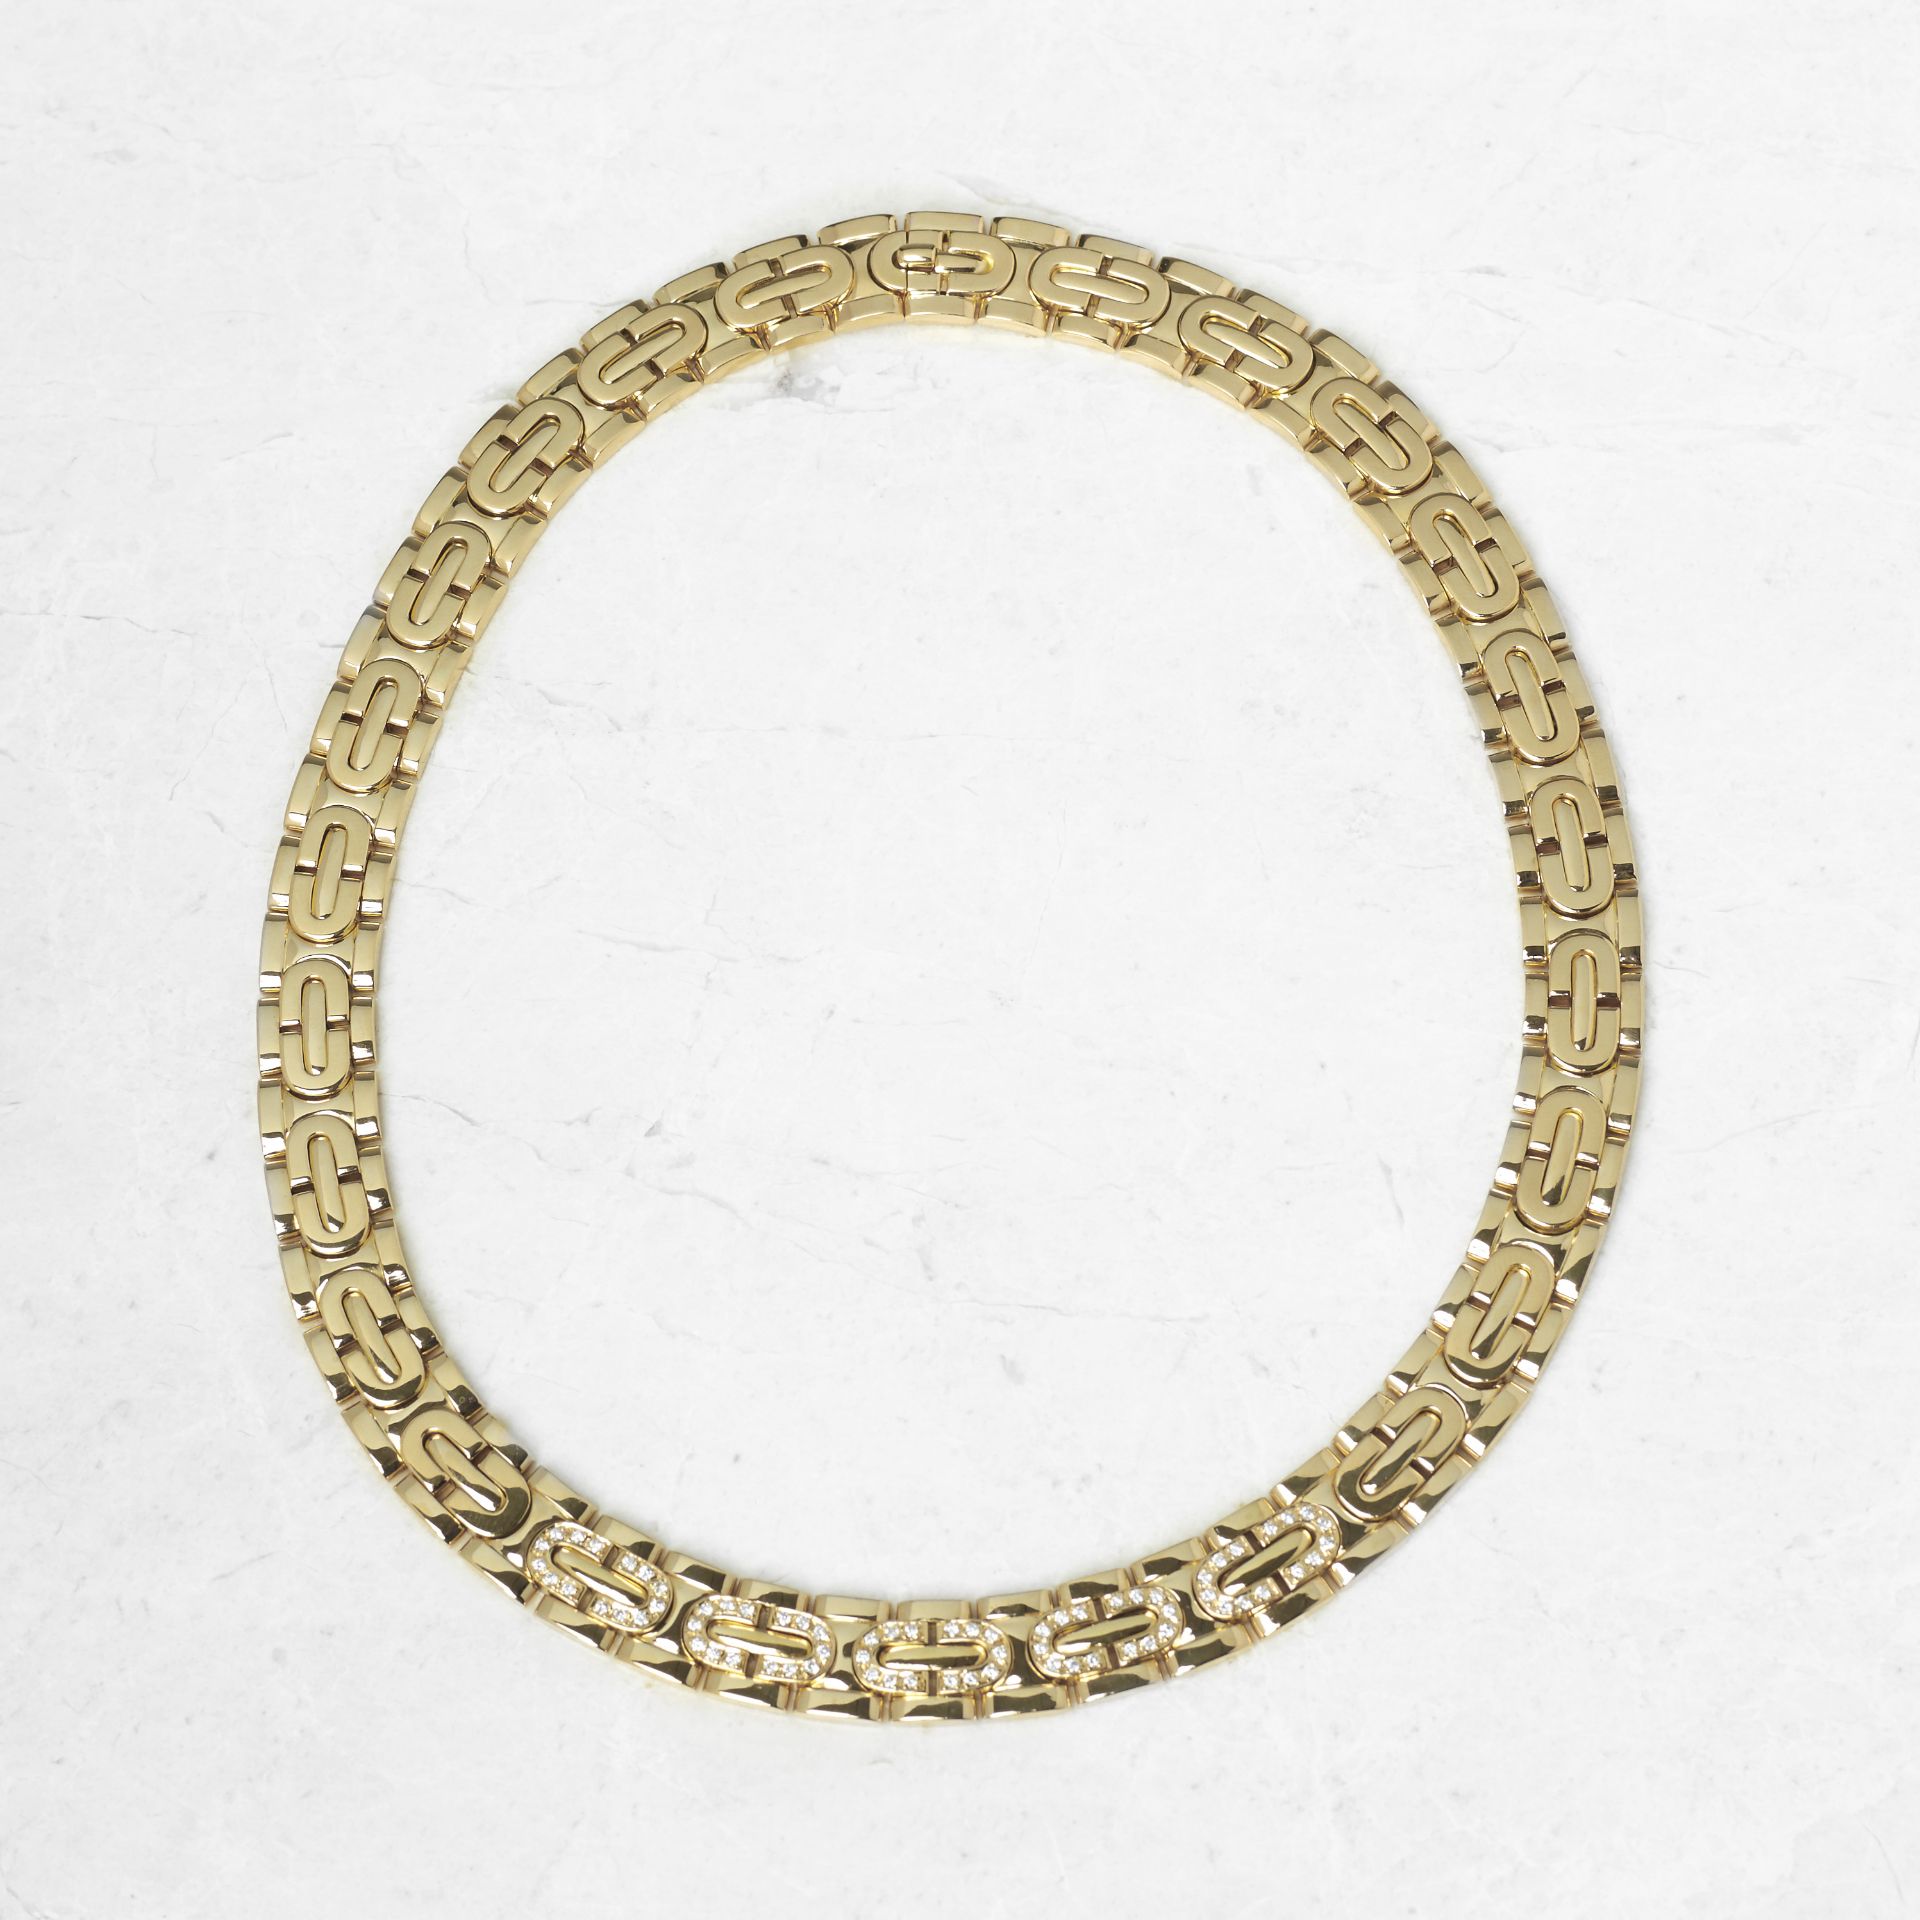 Cartier 18k Yellow Gold Oval Link Collar 0.70ct Diamond Maillon Necklace with Box, Certs & papers - Image 12 of 14